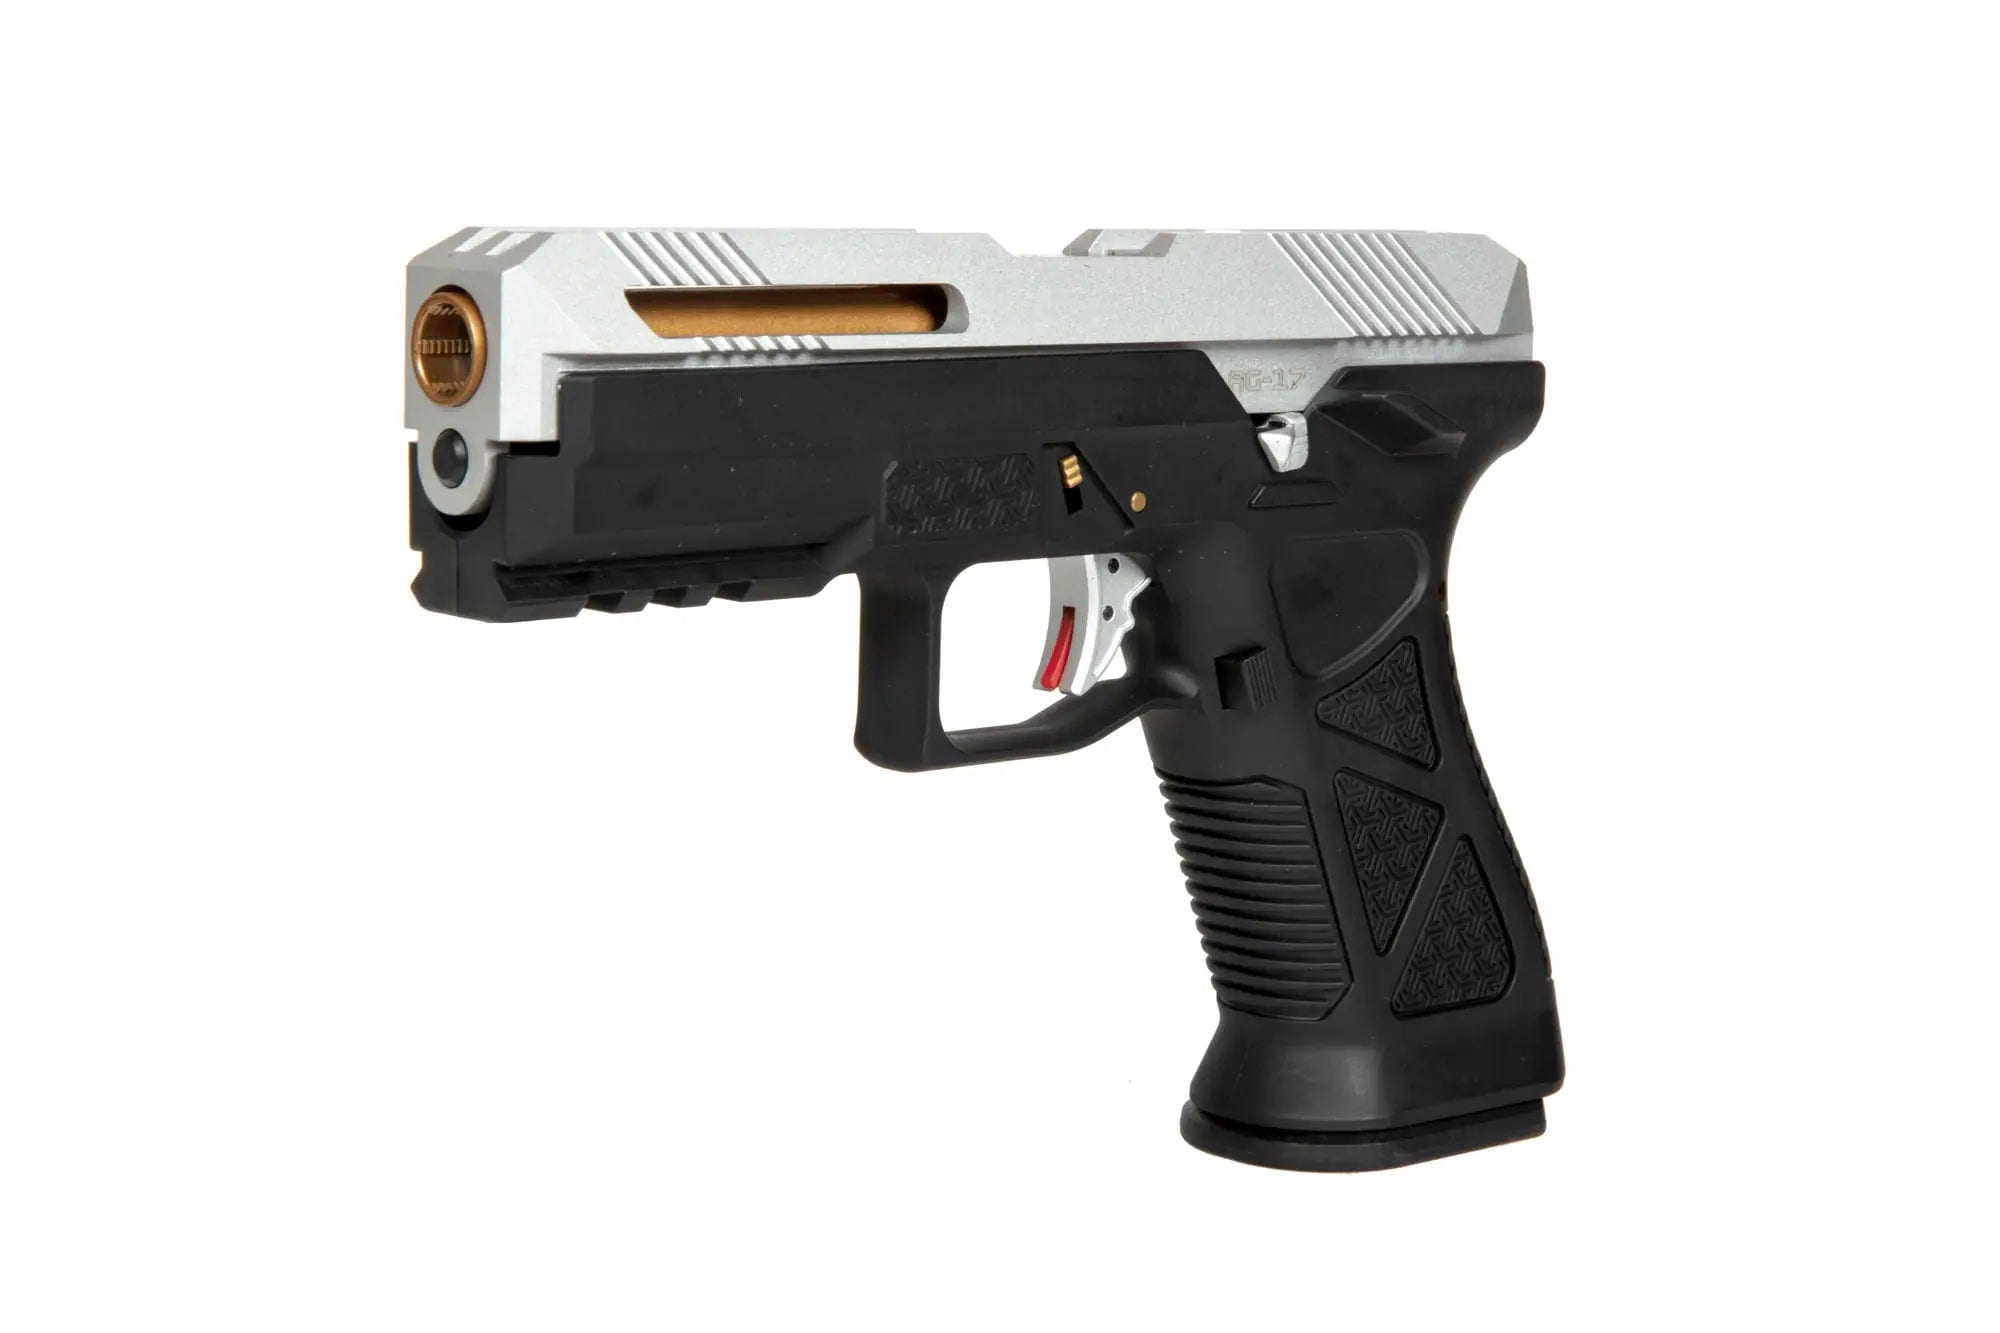 AG17 airsoft blowback pistol - silver and black